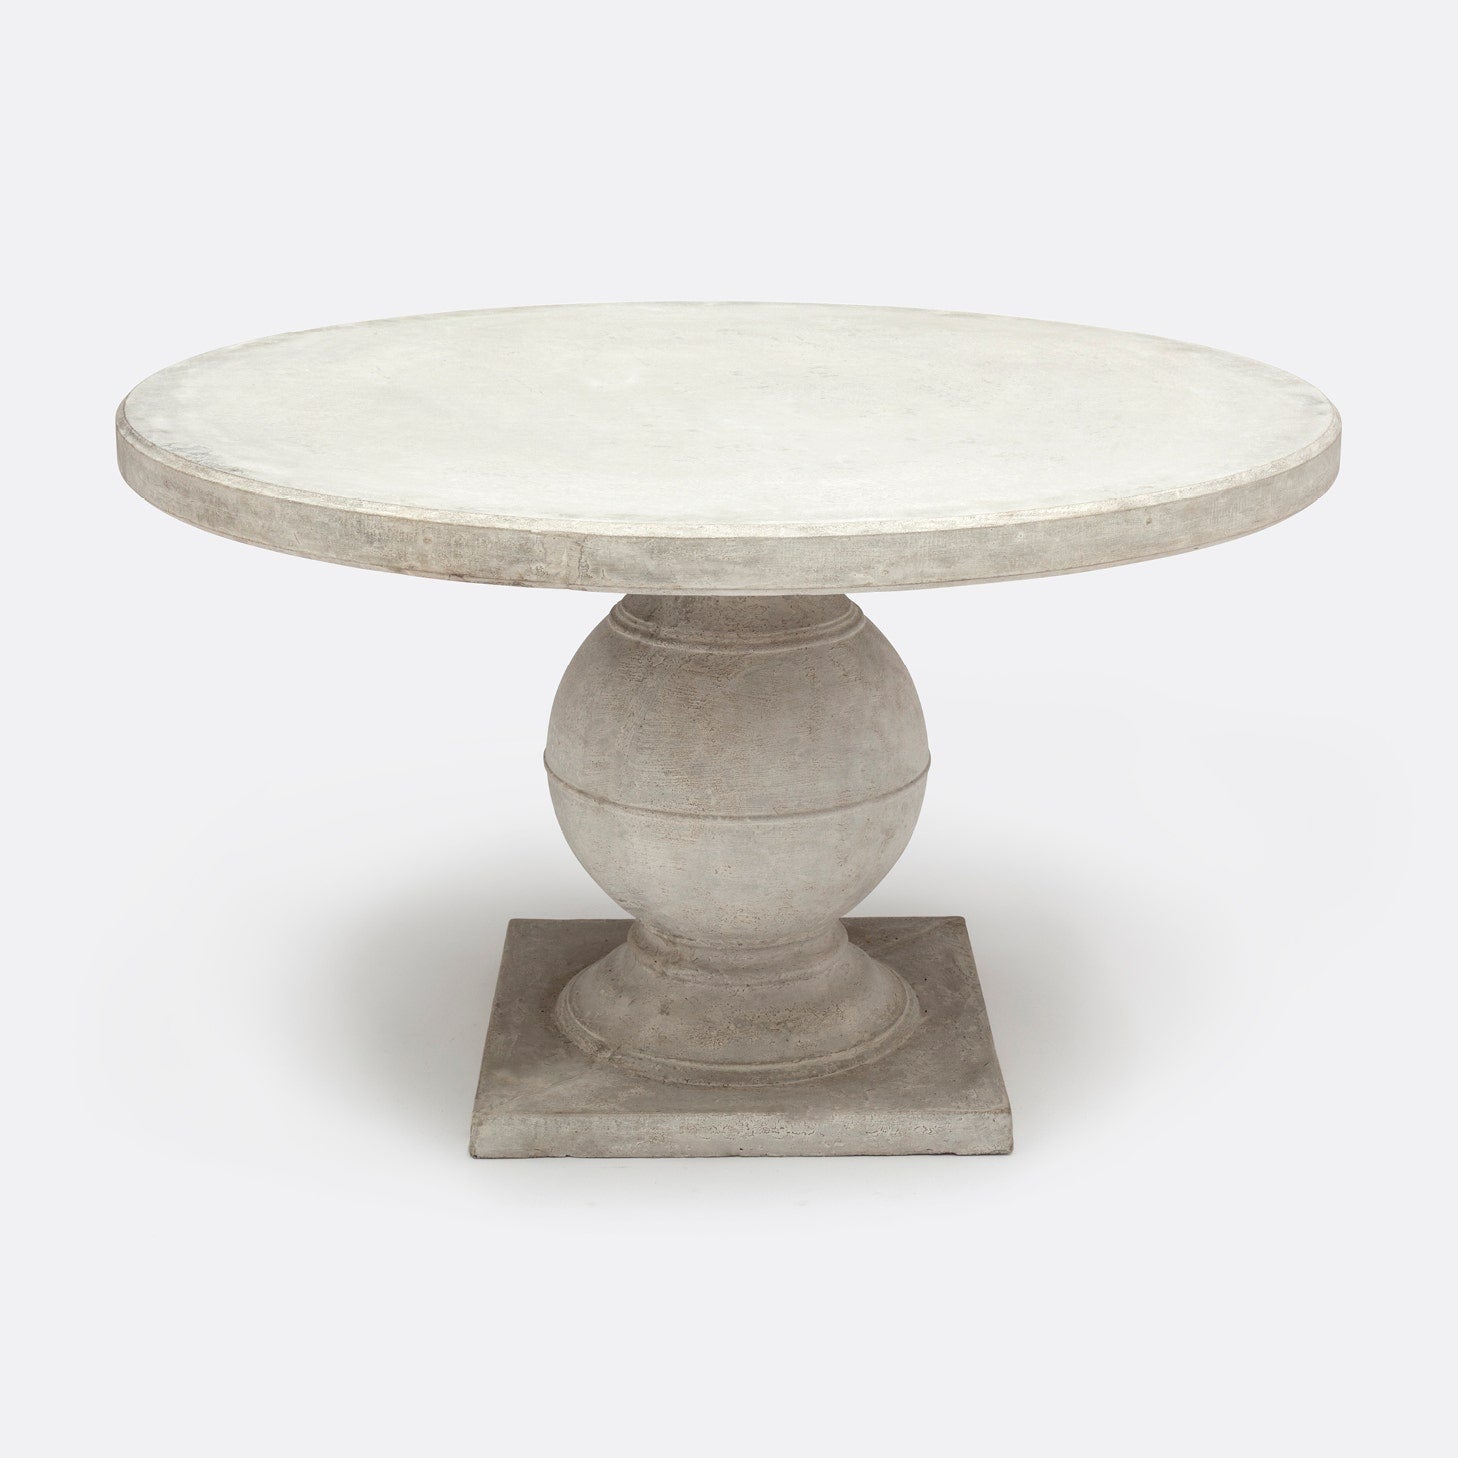 Made Goods Cyril 48" x 30" Light Gray Reconstituted Stone Outdoor Dinning Table With Round Table Top